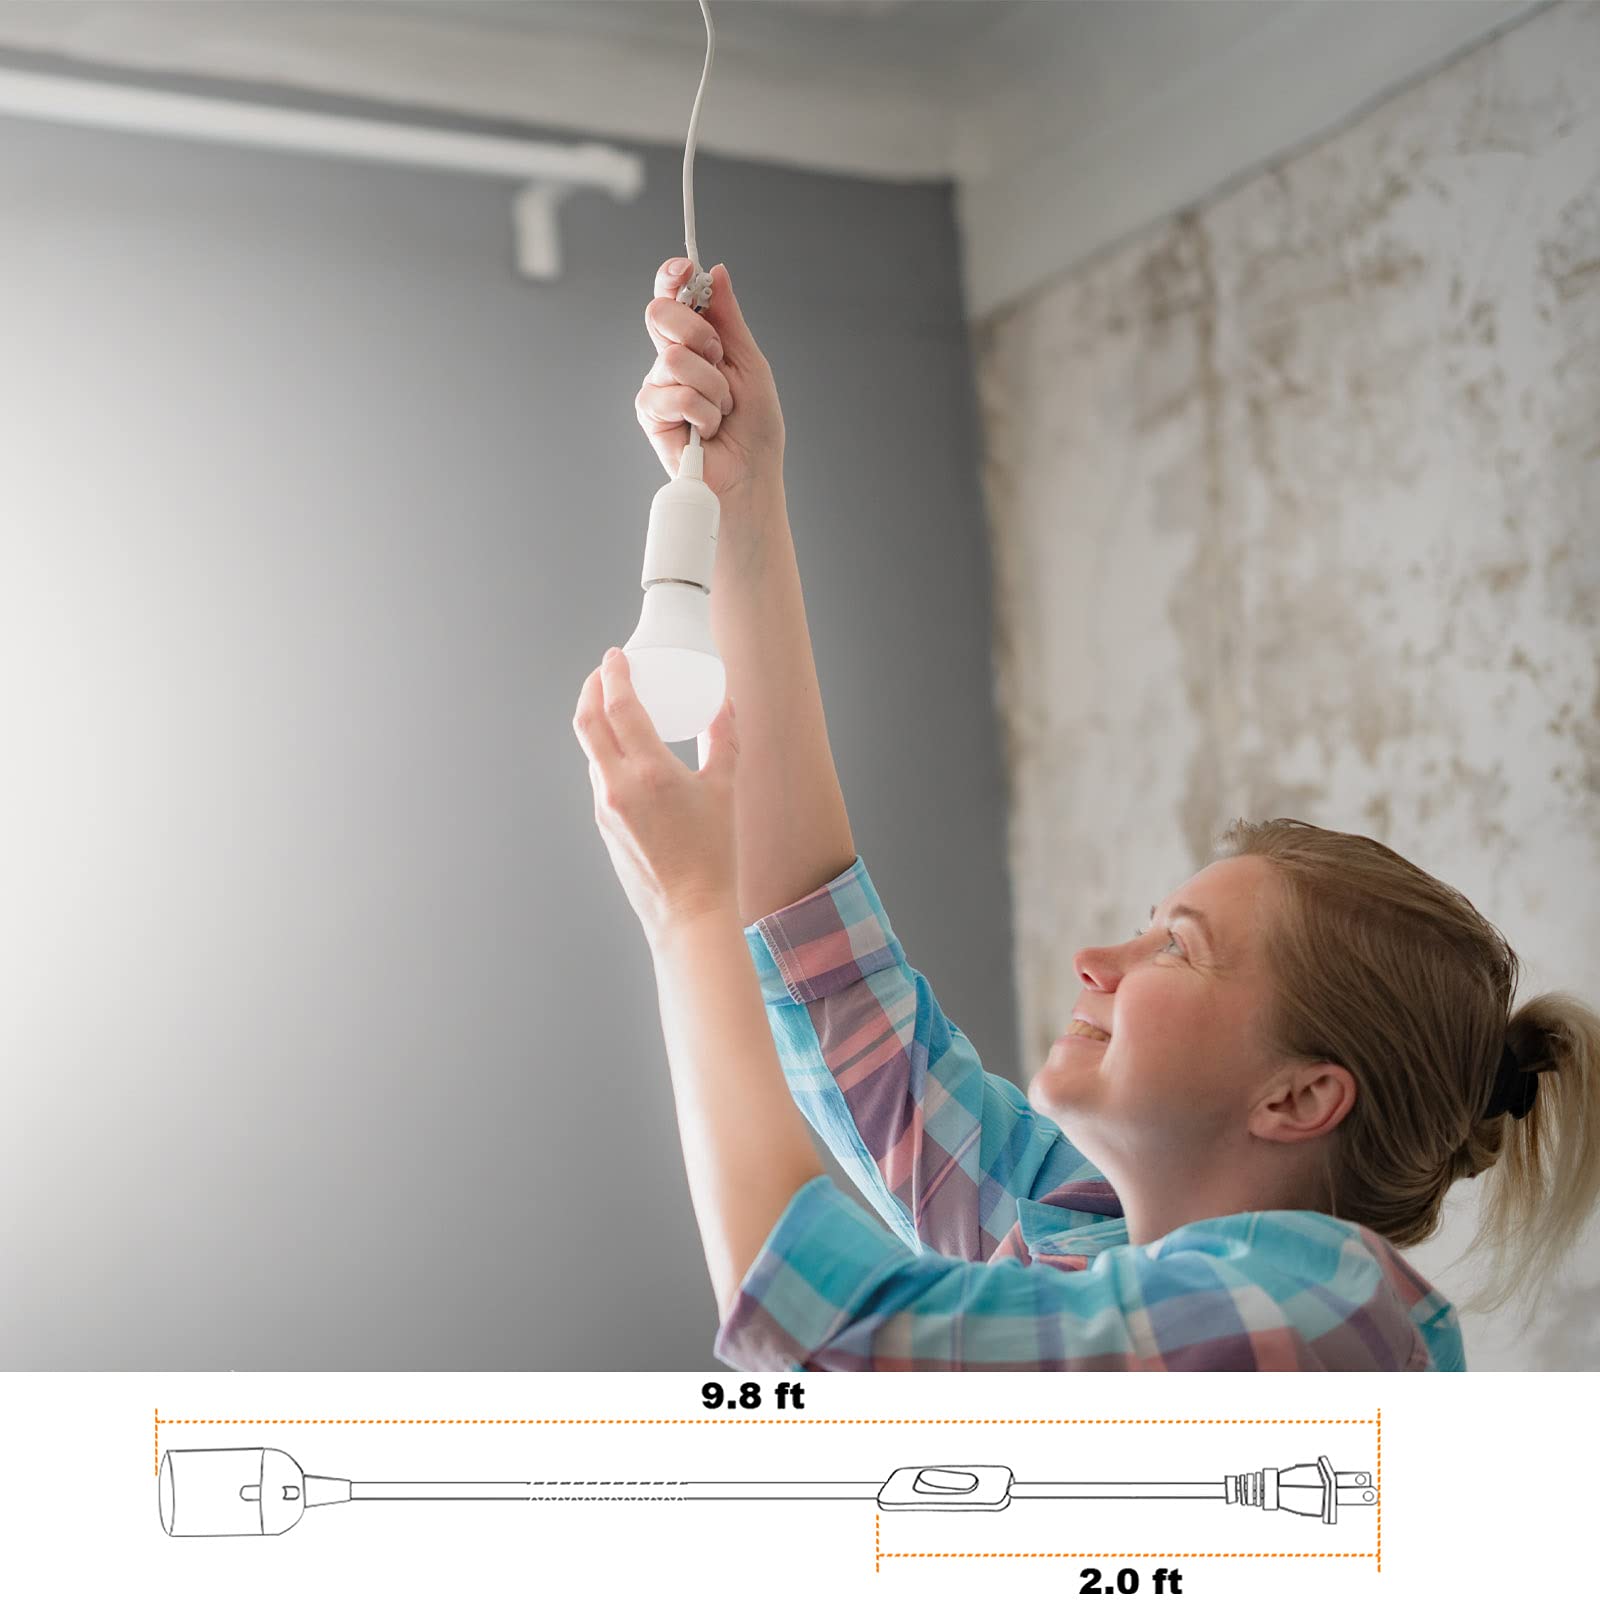 Plug in Hanging Light Kit, Retro Hanging Lights with Plug in Cord, E26 E27 Industrial Pendant Light Fixture, 9.8 FT Cord with On/Off Switch Hanging Lamp for Living Room Bedroom 2 Pack (White)